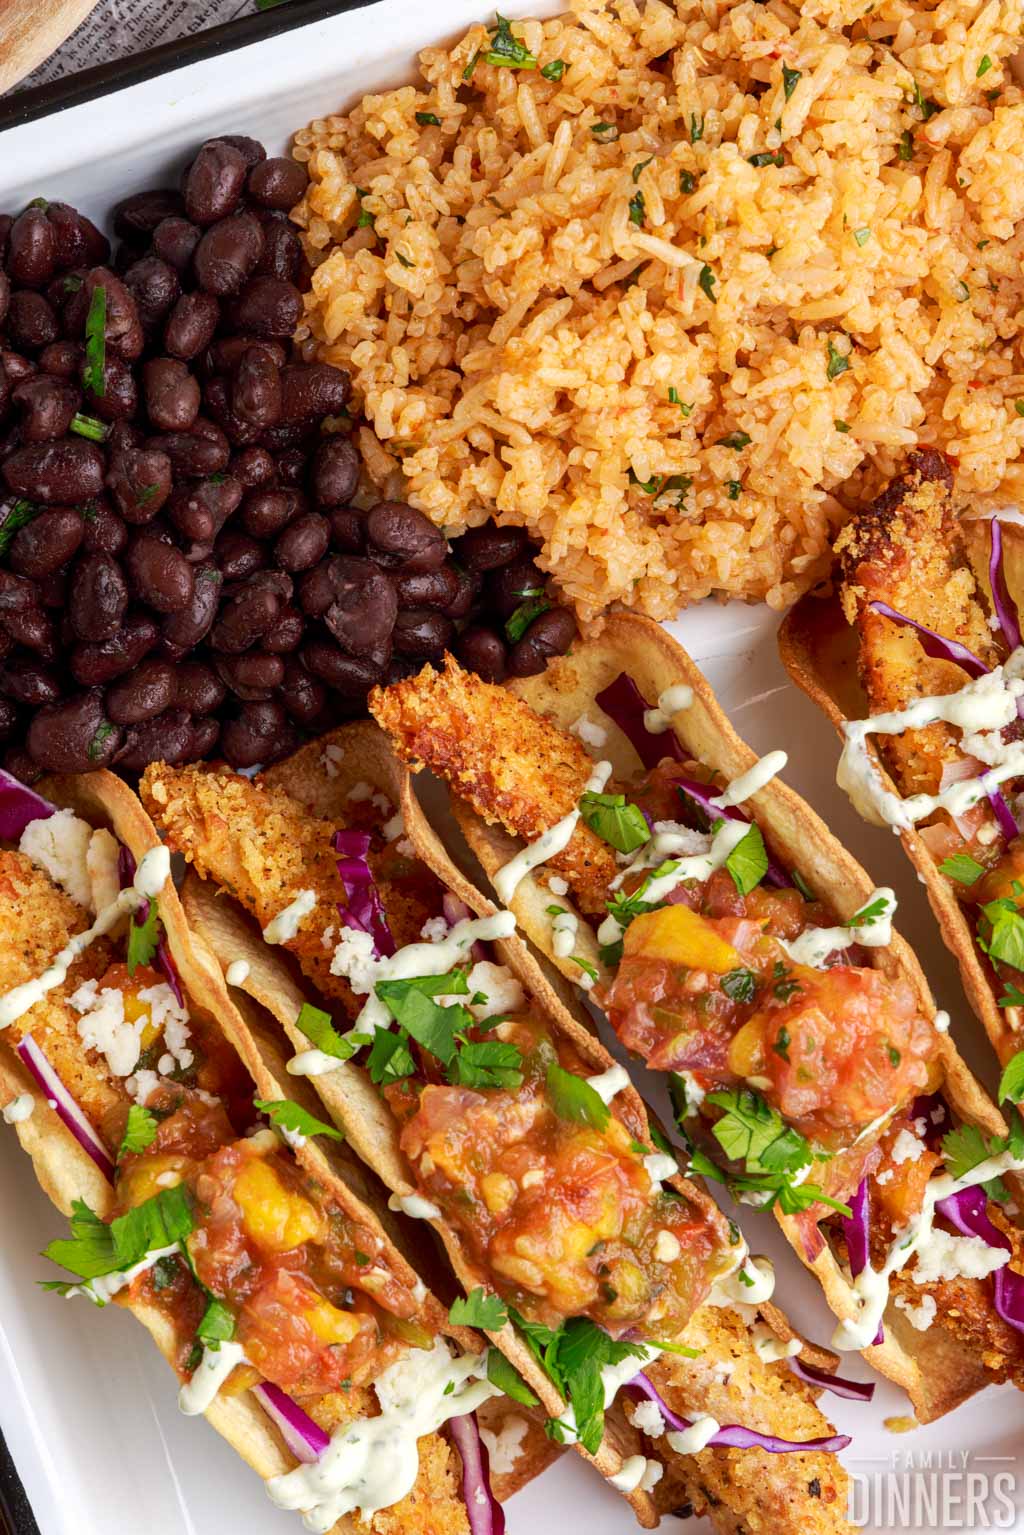 Fried fish tacos on a plate with rice and beans.